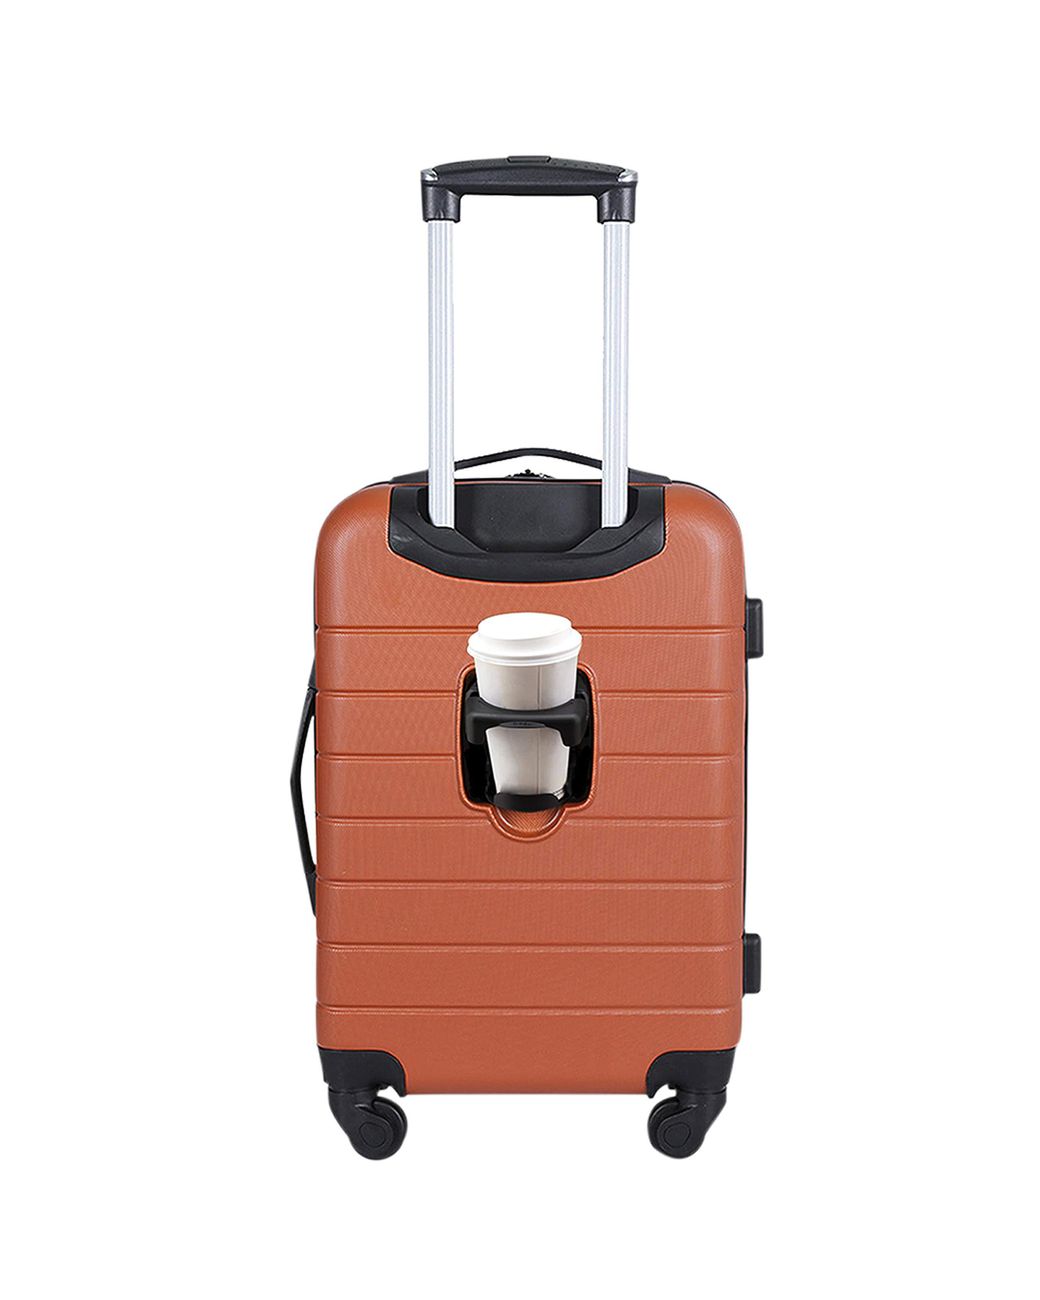 Wrangler Smart Luggage Set With Cup Holder And Usb Port in Toffee Womens Bags Luggage and suitcases Brown 